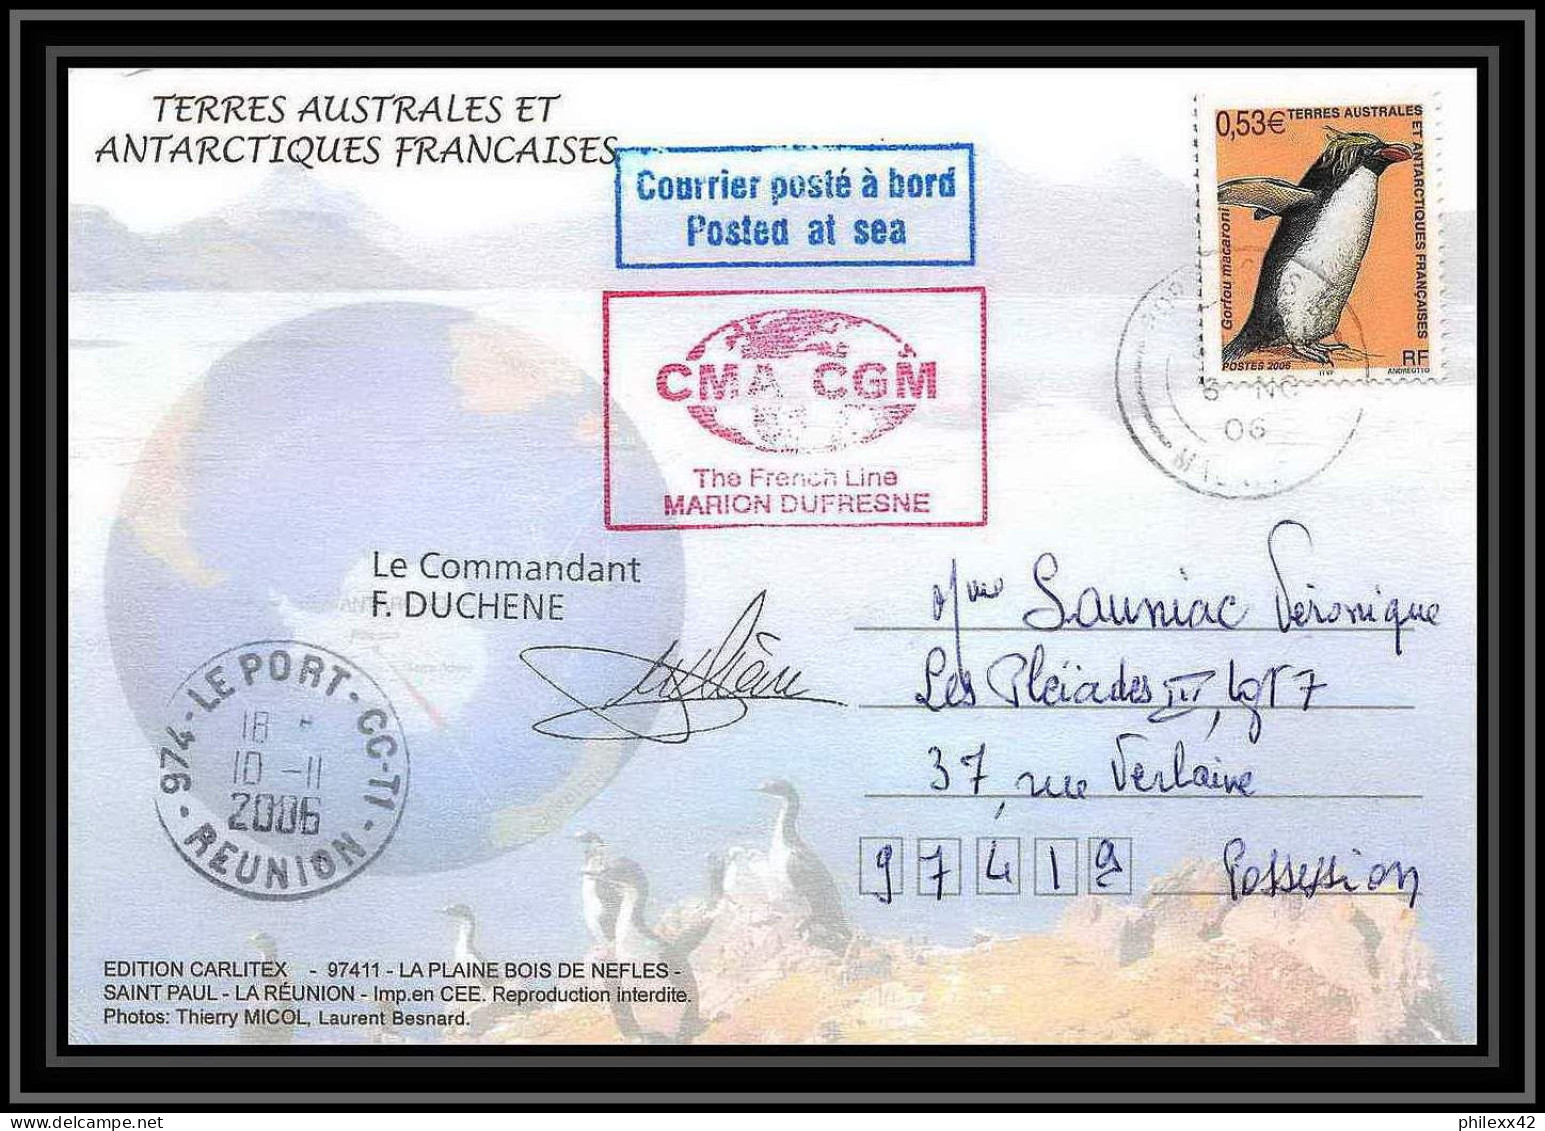 2640 ANTARCTIC ILE MAURICE (taaf)-carte Postale Dufresne 2 Signé Signed 10/11/2006 N°449 - Expéditions Antarctiques